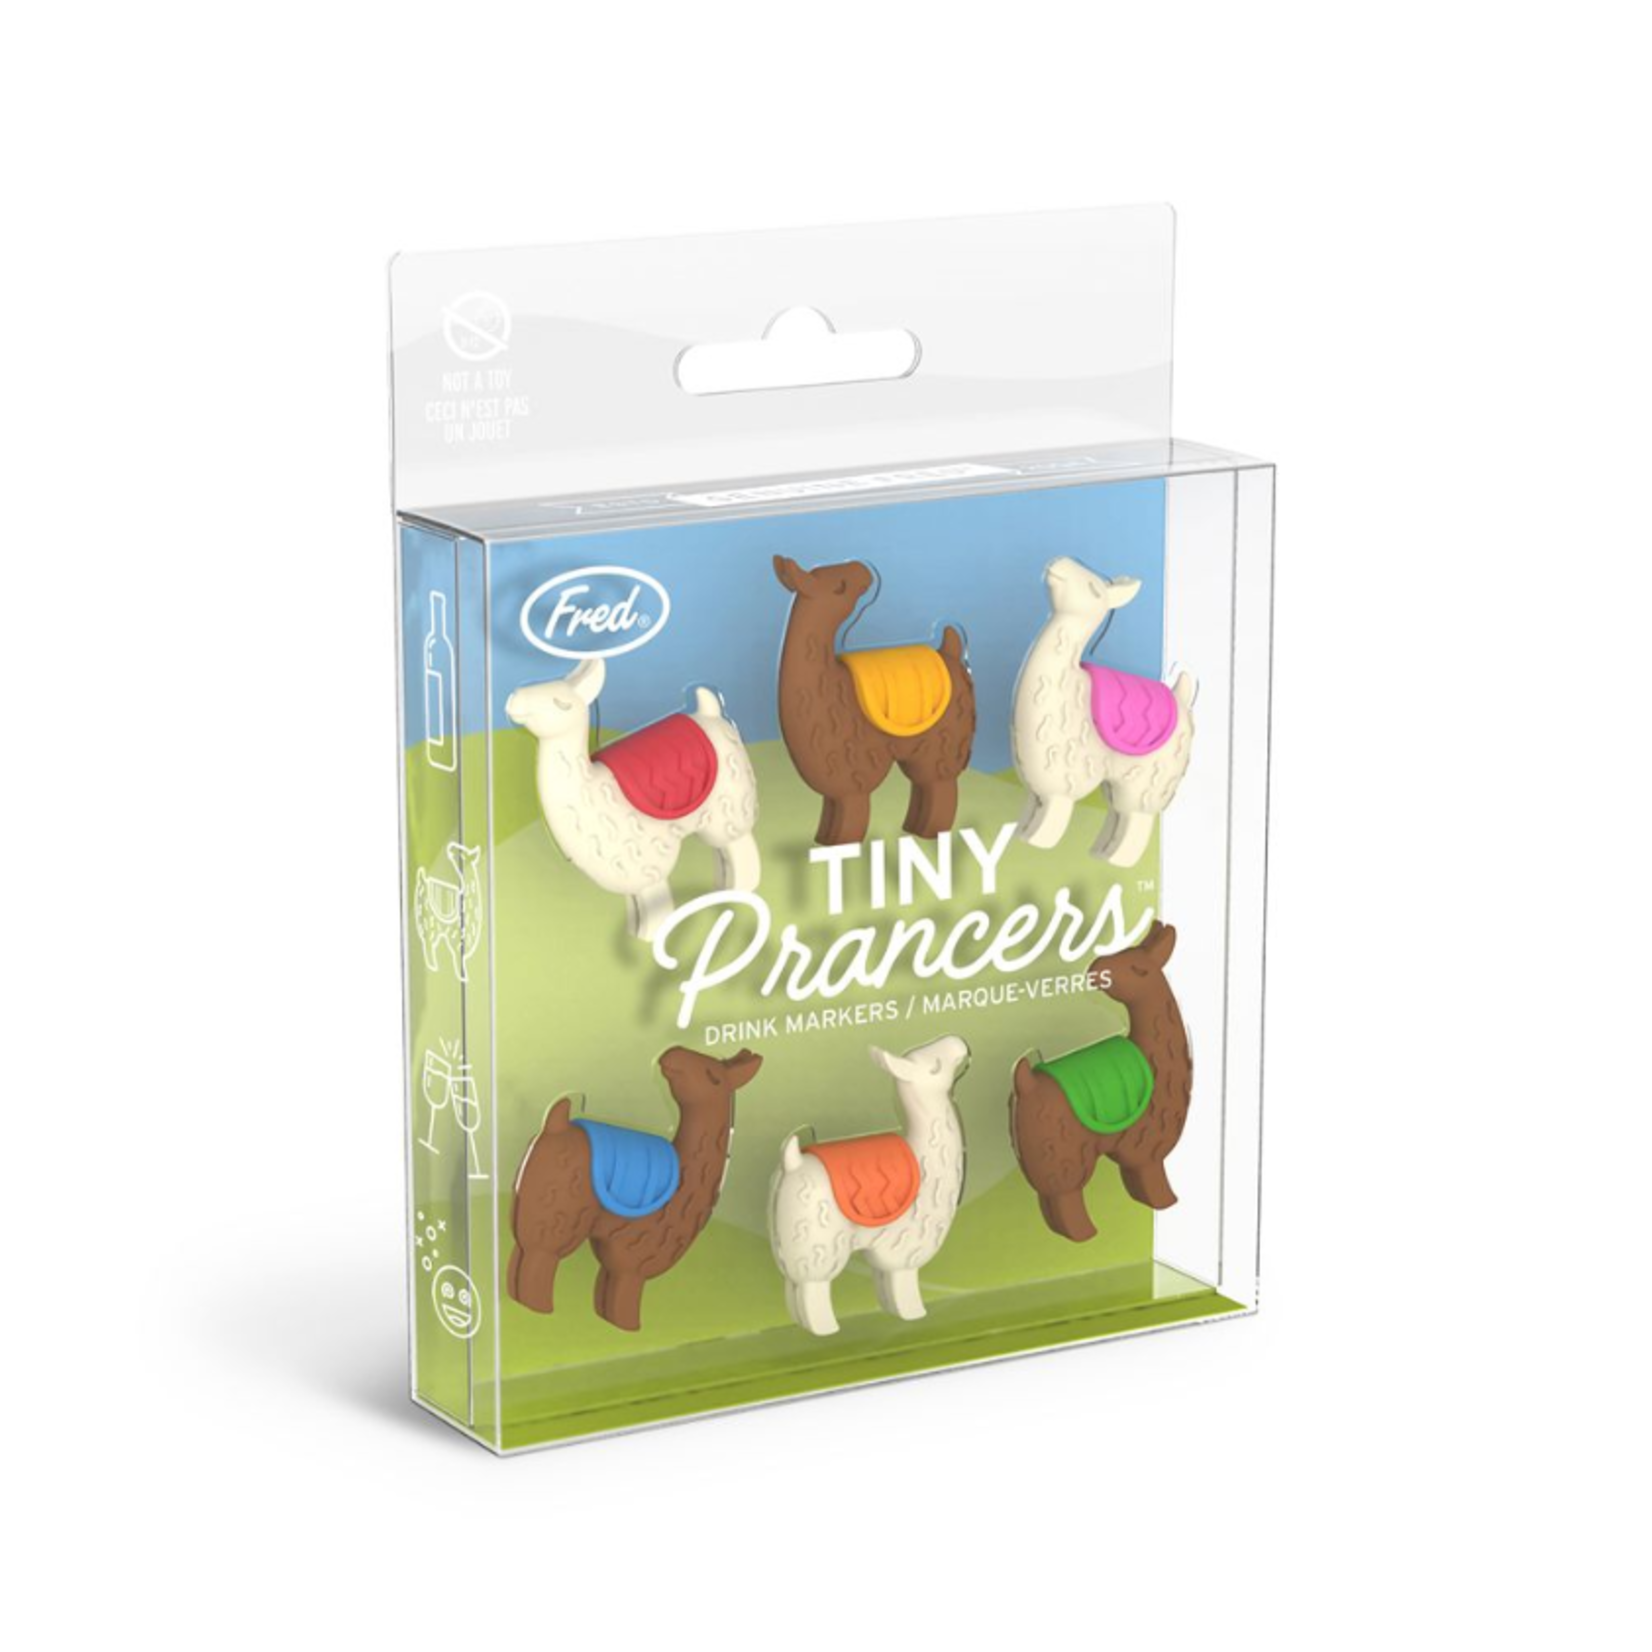 Fred & Friends Wine Markers, Tiny Prancers, Llama